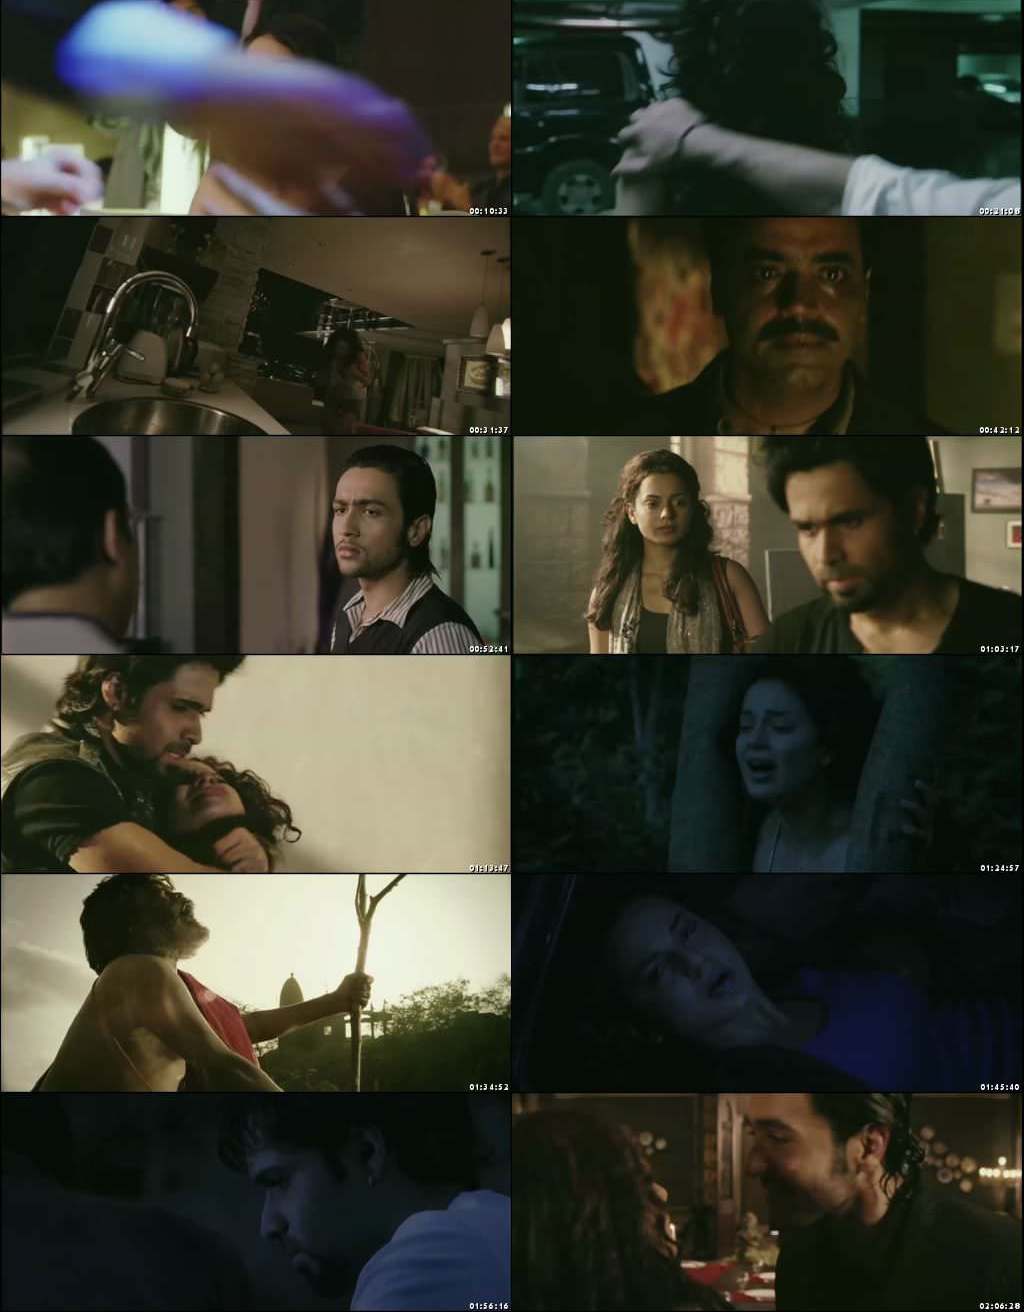 Raaz: The Mystery Continues 2009 Full Hindi Movie Online Watch